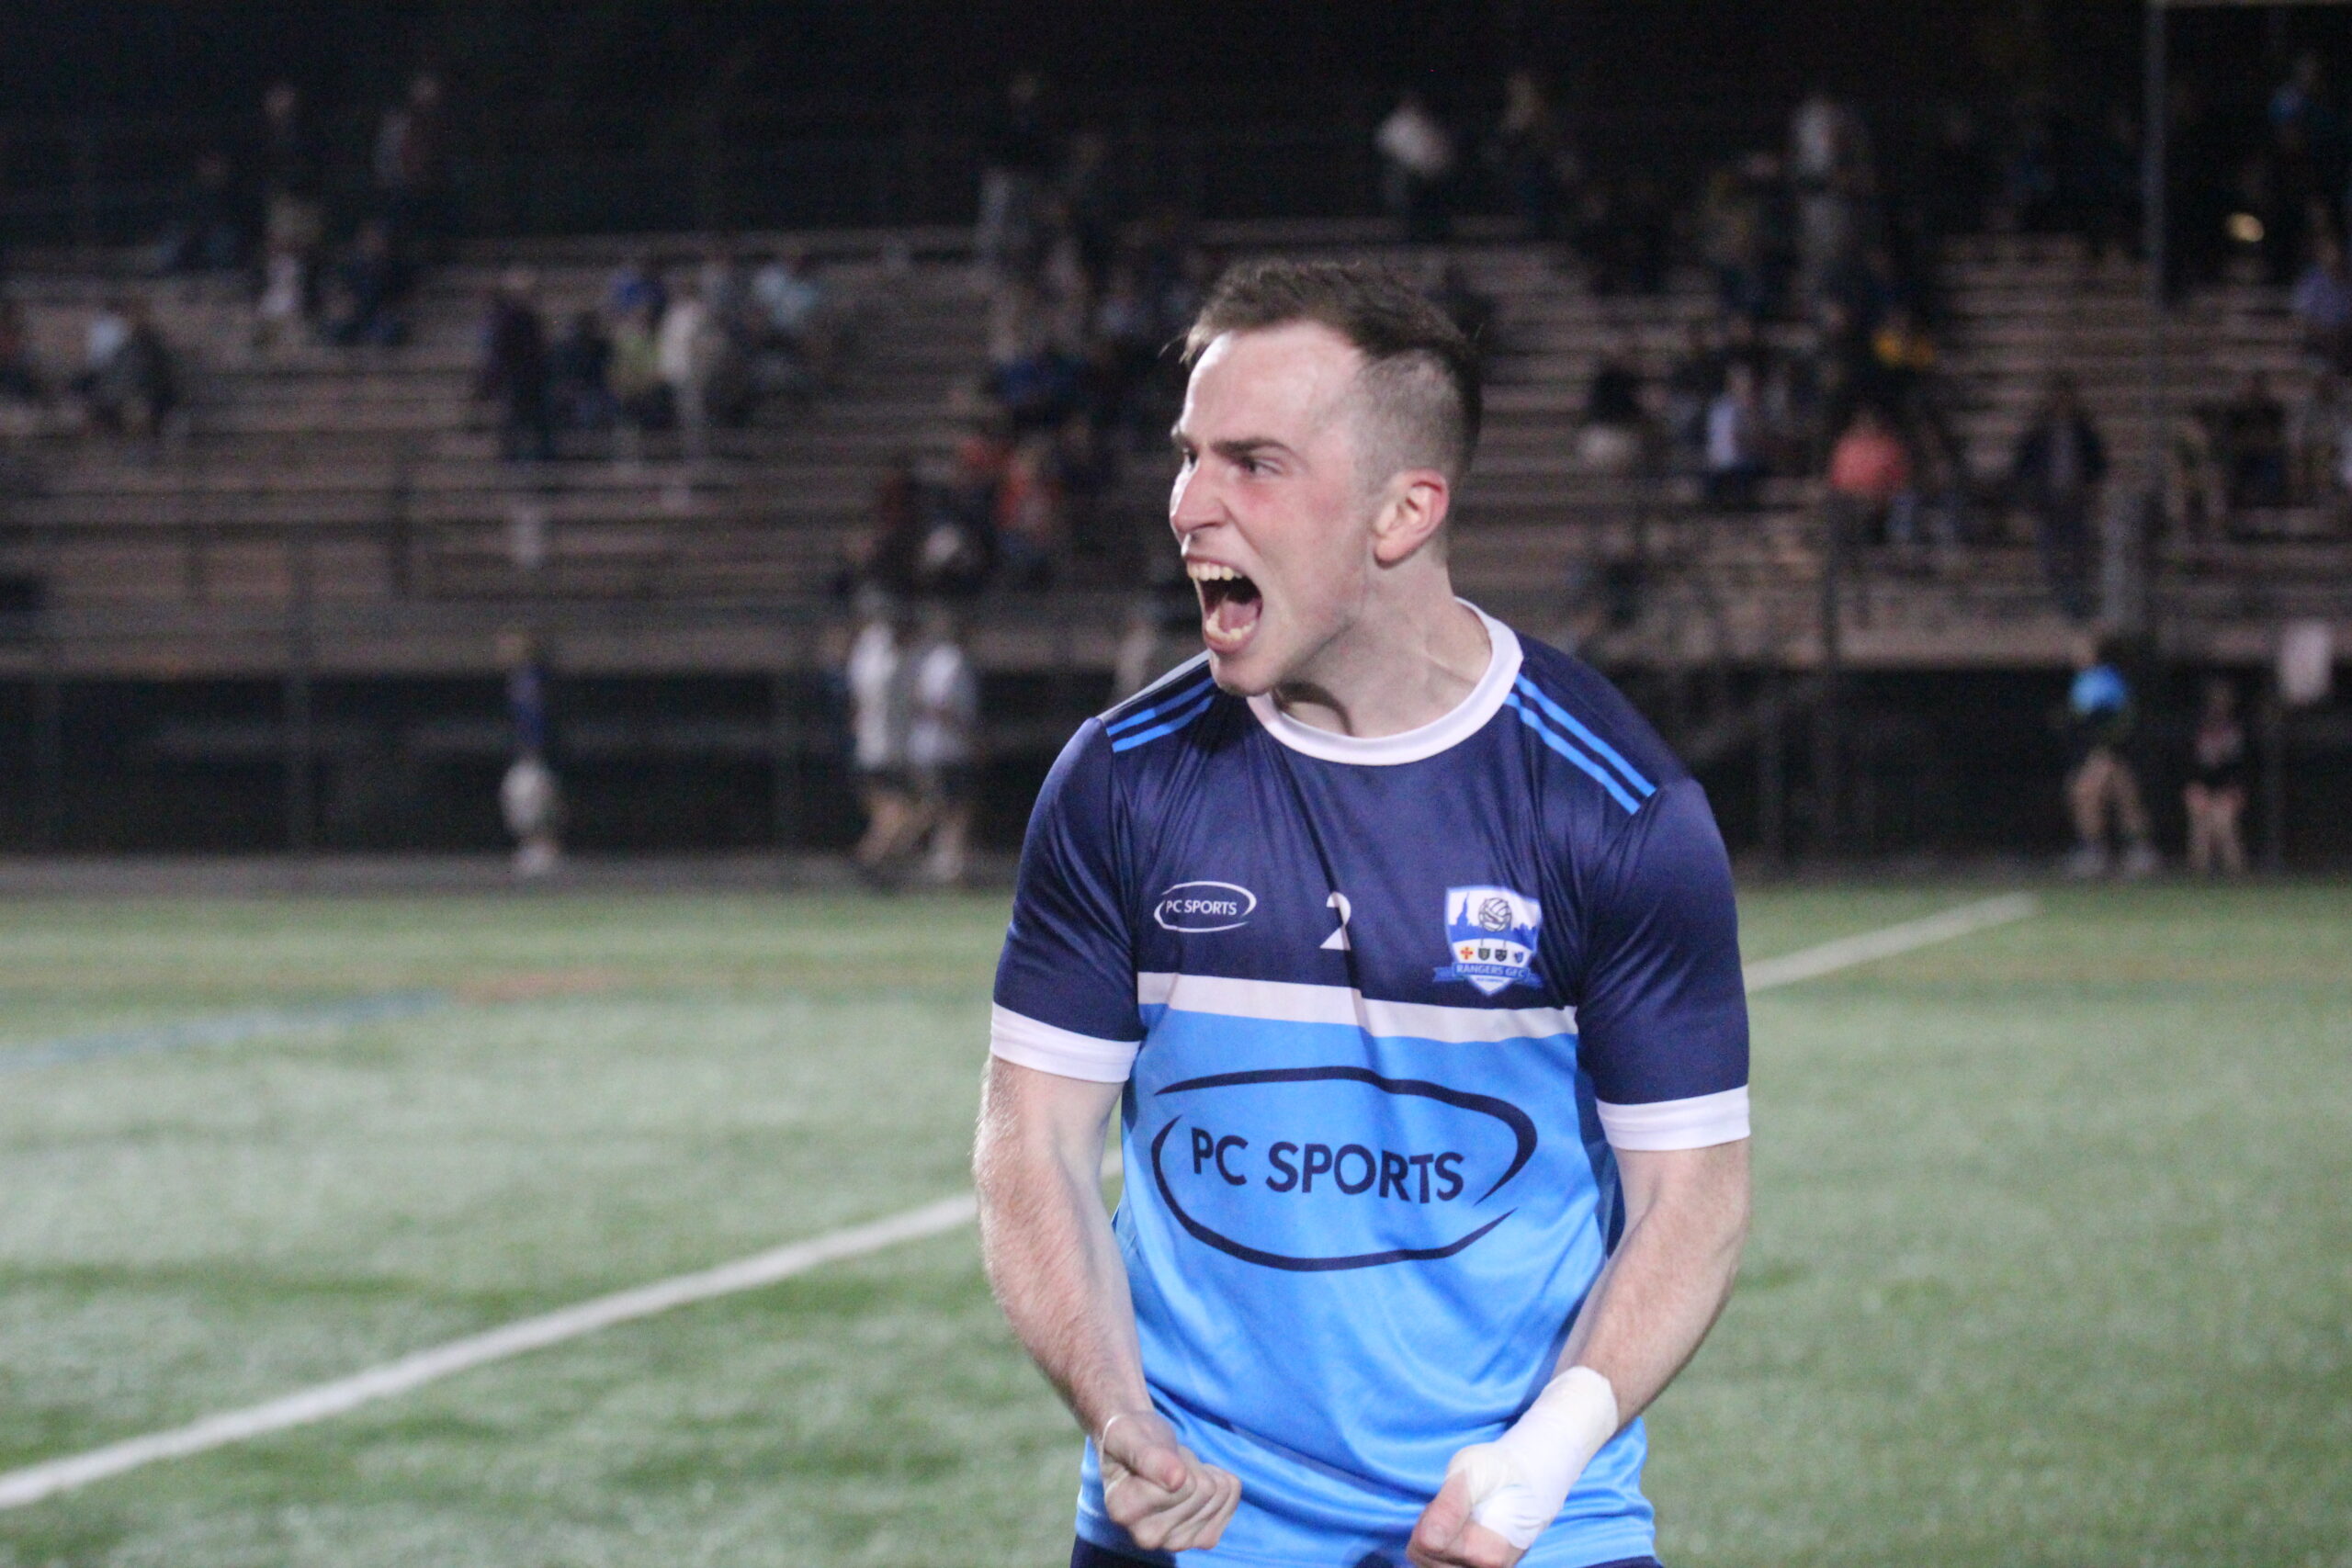 Rangers GFC player Emmet Clarke celebrates after the final whistle at Gaelic Park on Oct. 1, 2021. Rangers GFC v Shannon Gaels (Photo by Sharon Redican)